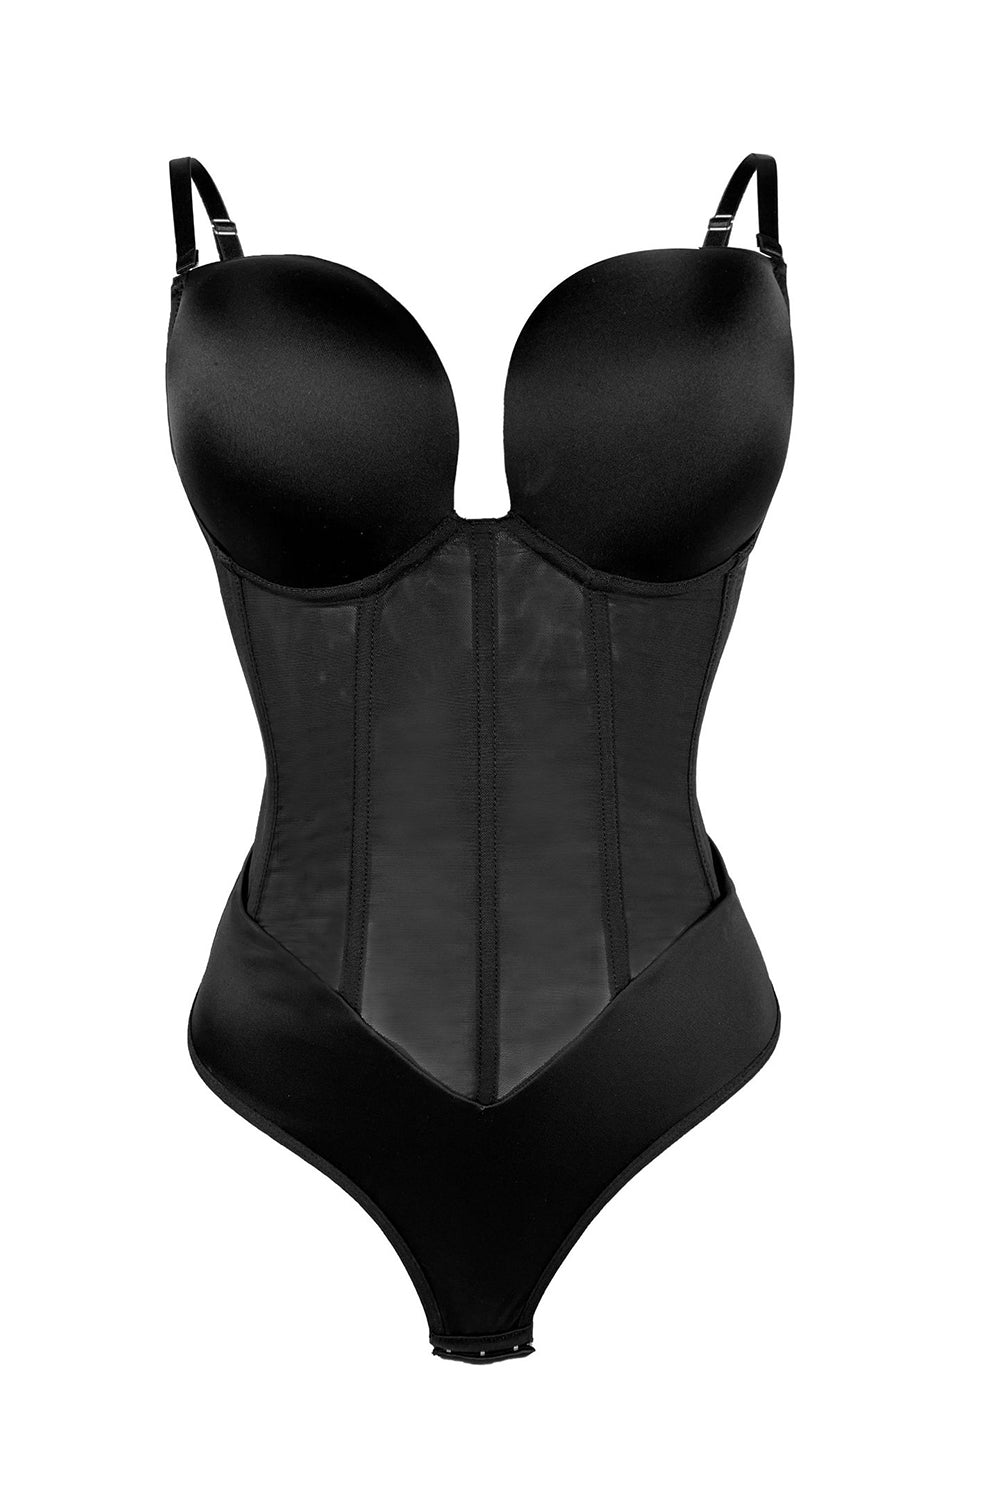 Wedtrend Women Party Wear Black Corset Tummy Control Butt Lifting